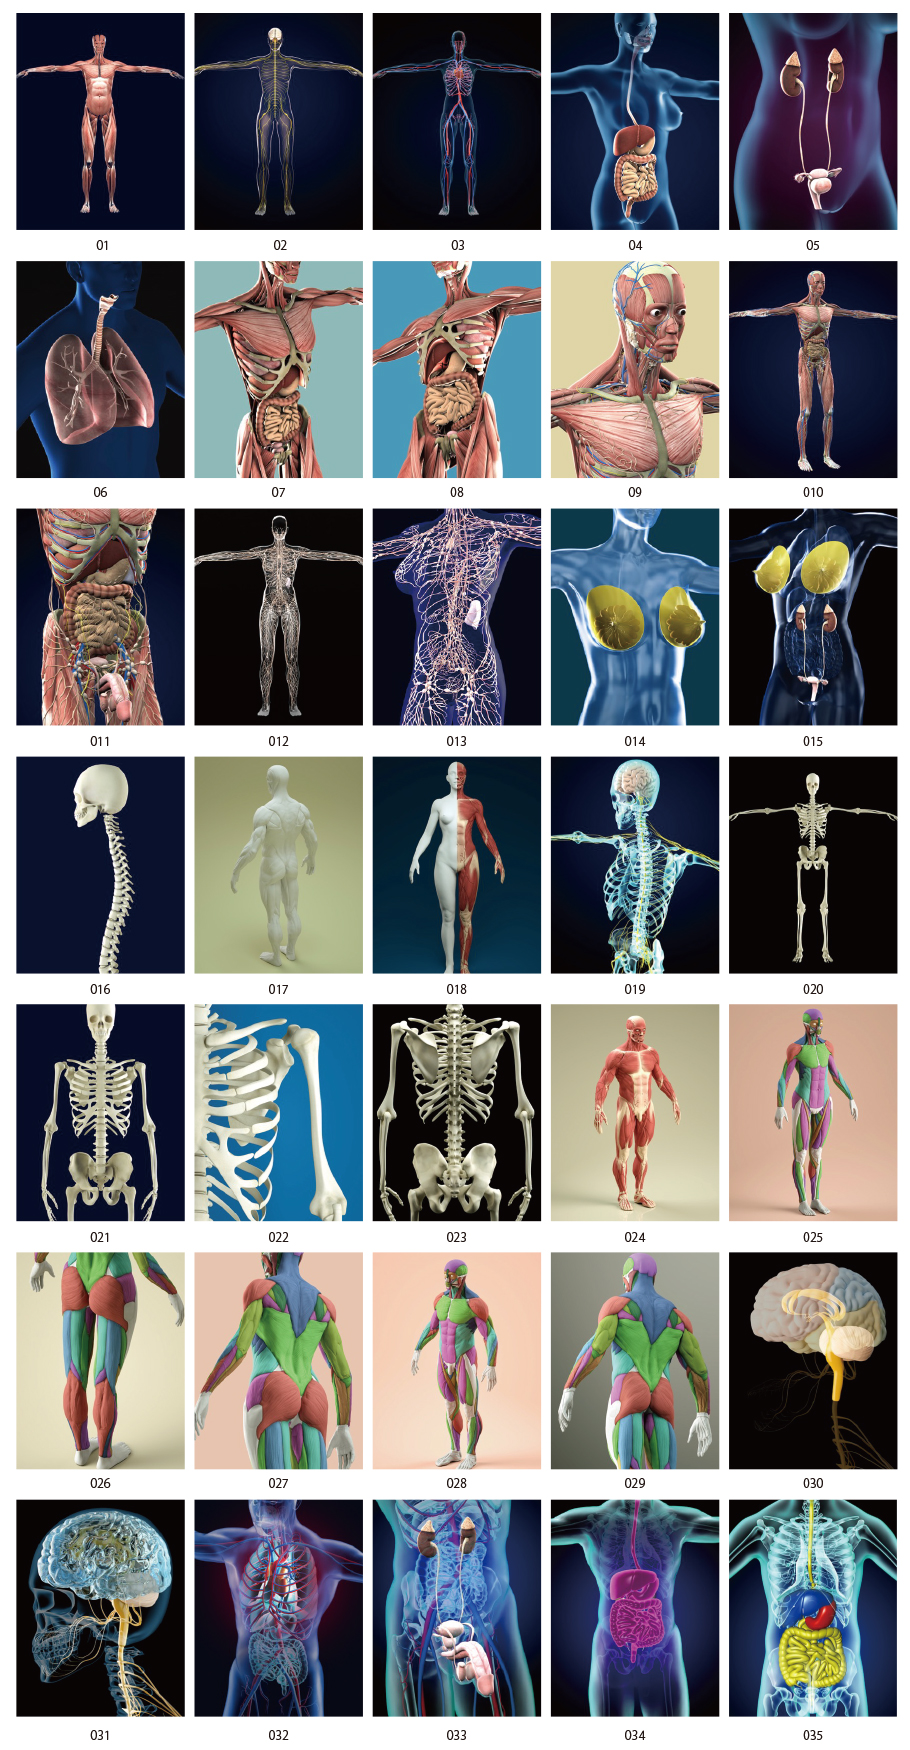 3D organ dissection diagram CG material collection